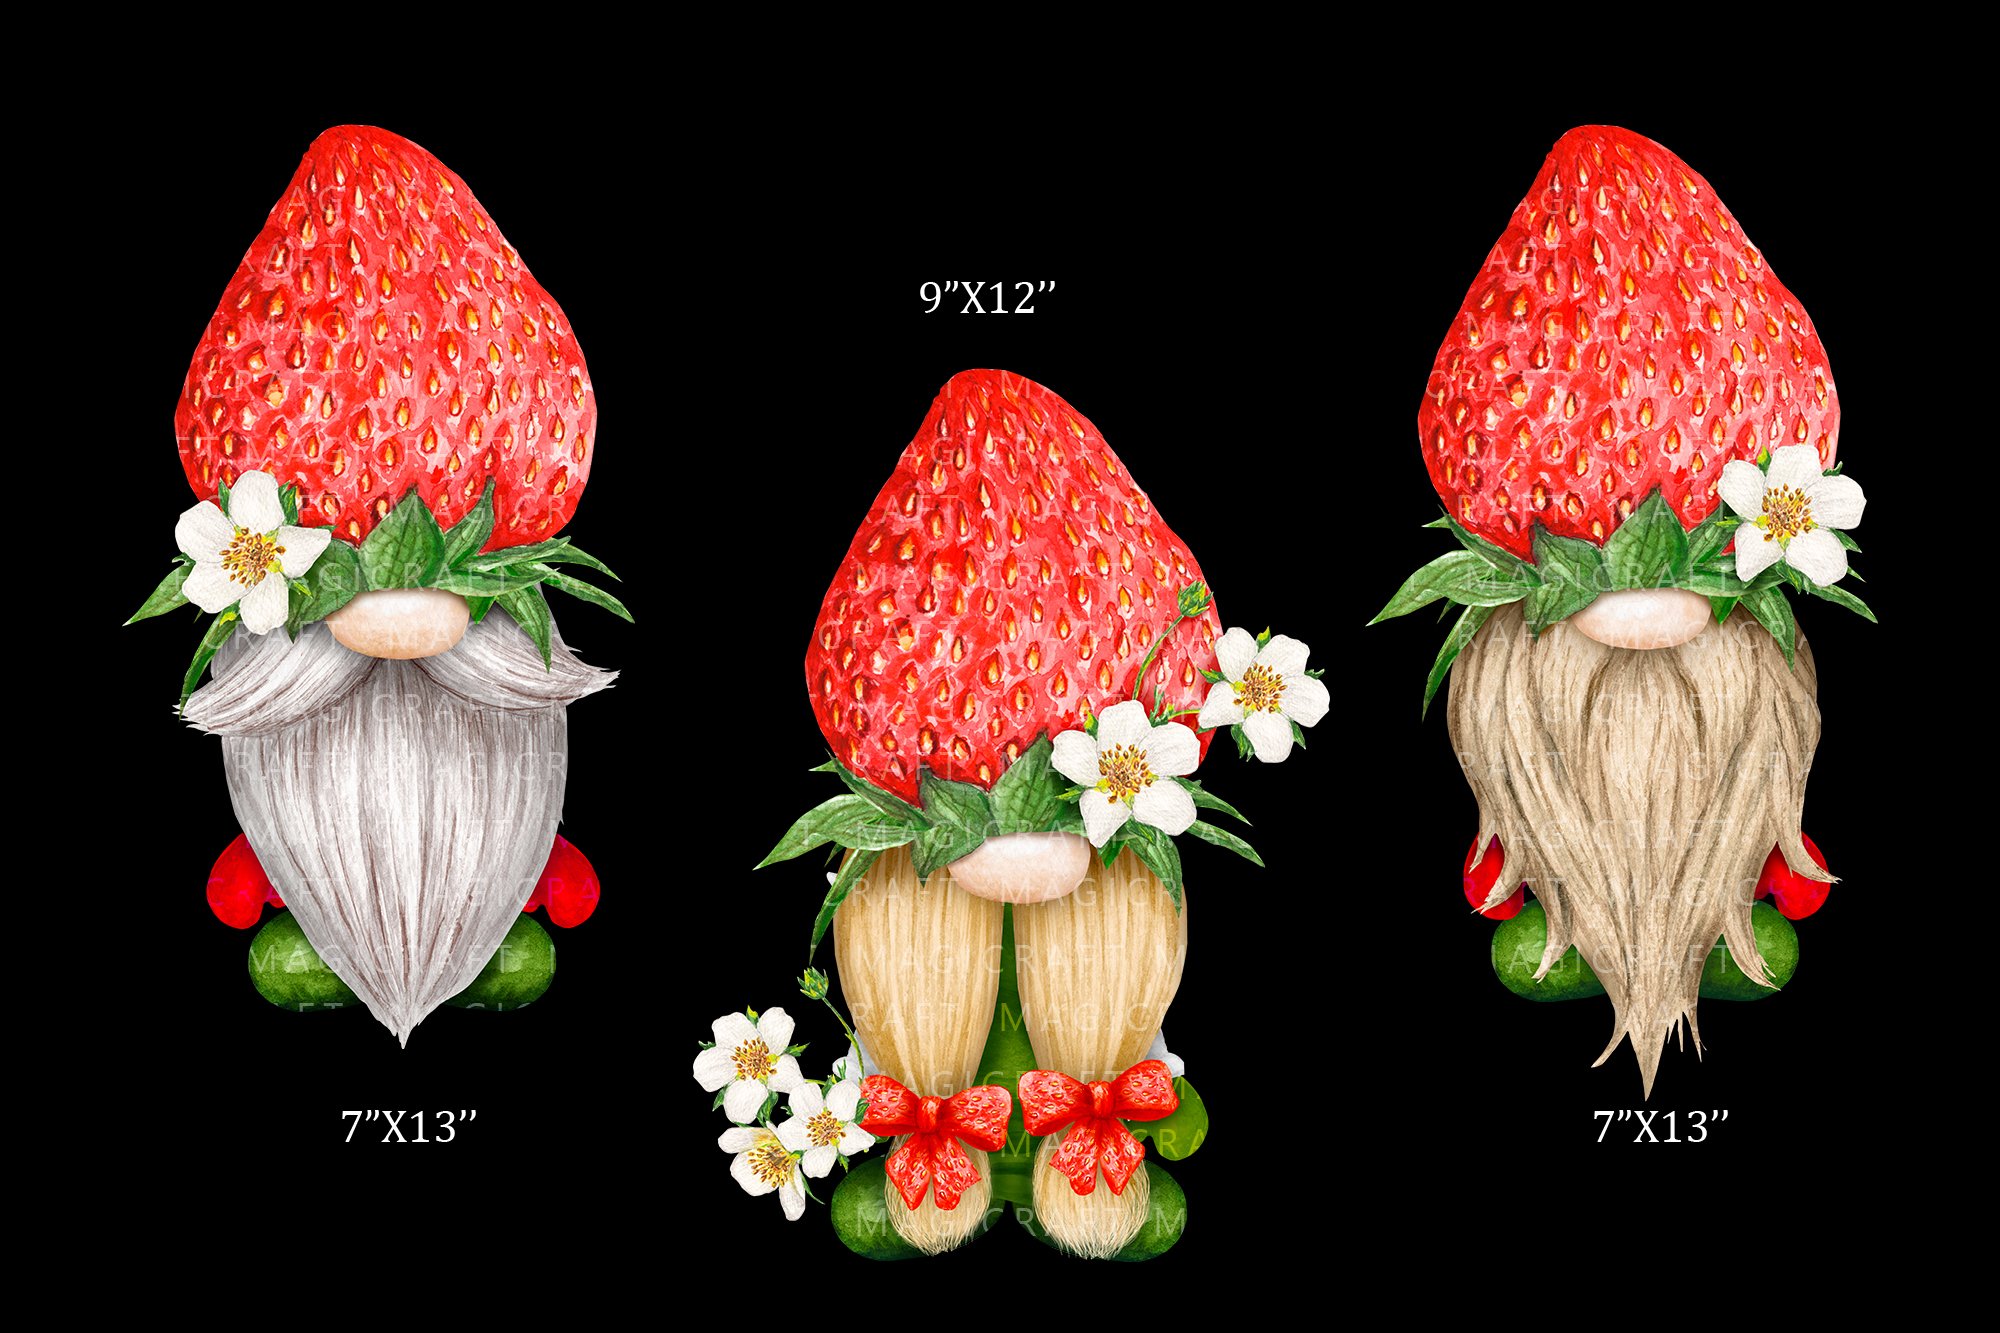 A set of 3 different drawings of a gnome strawberry on a black background.